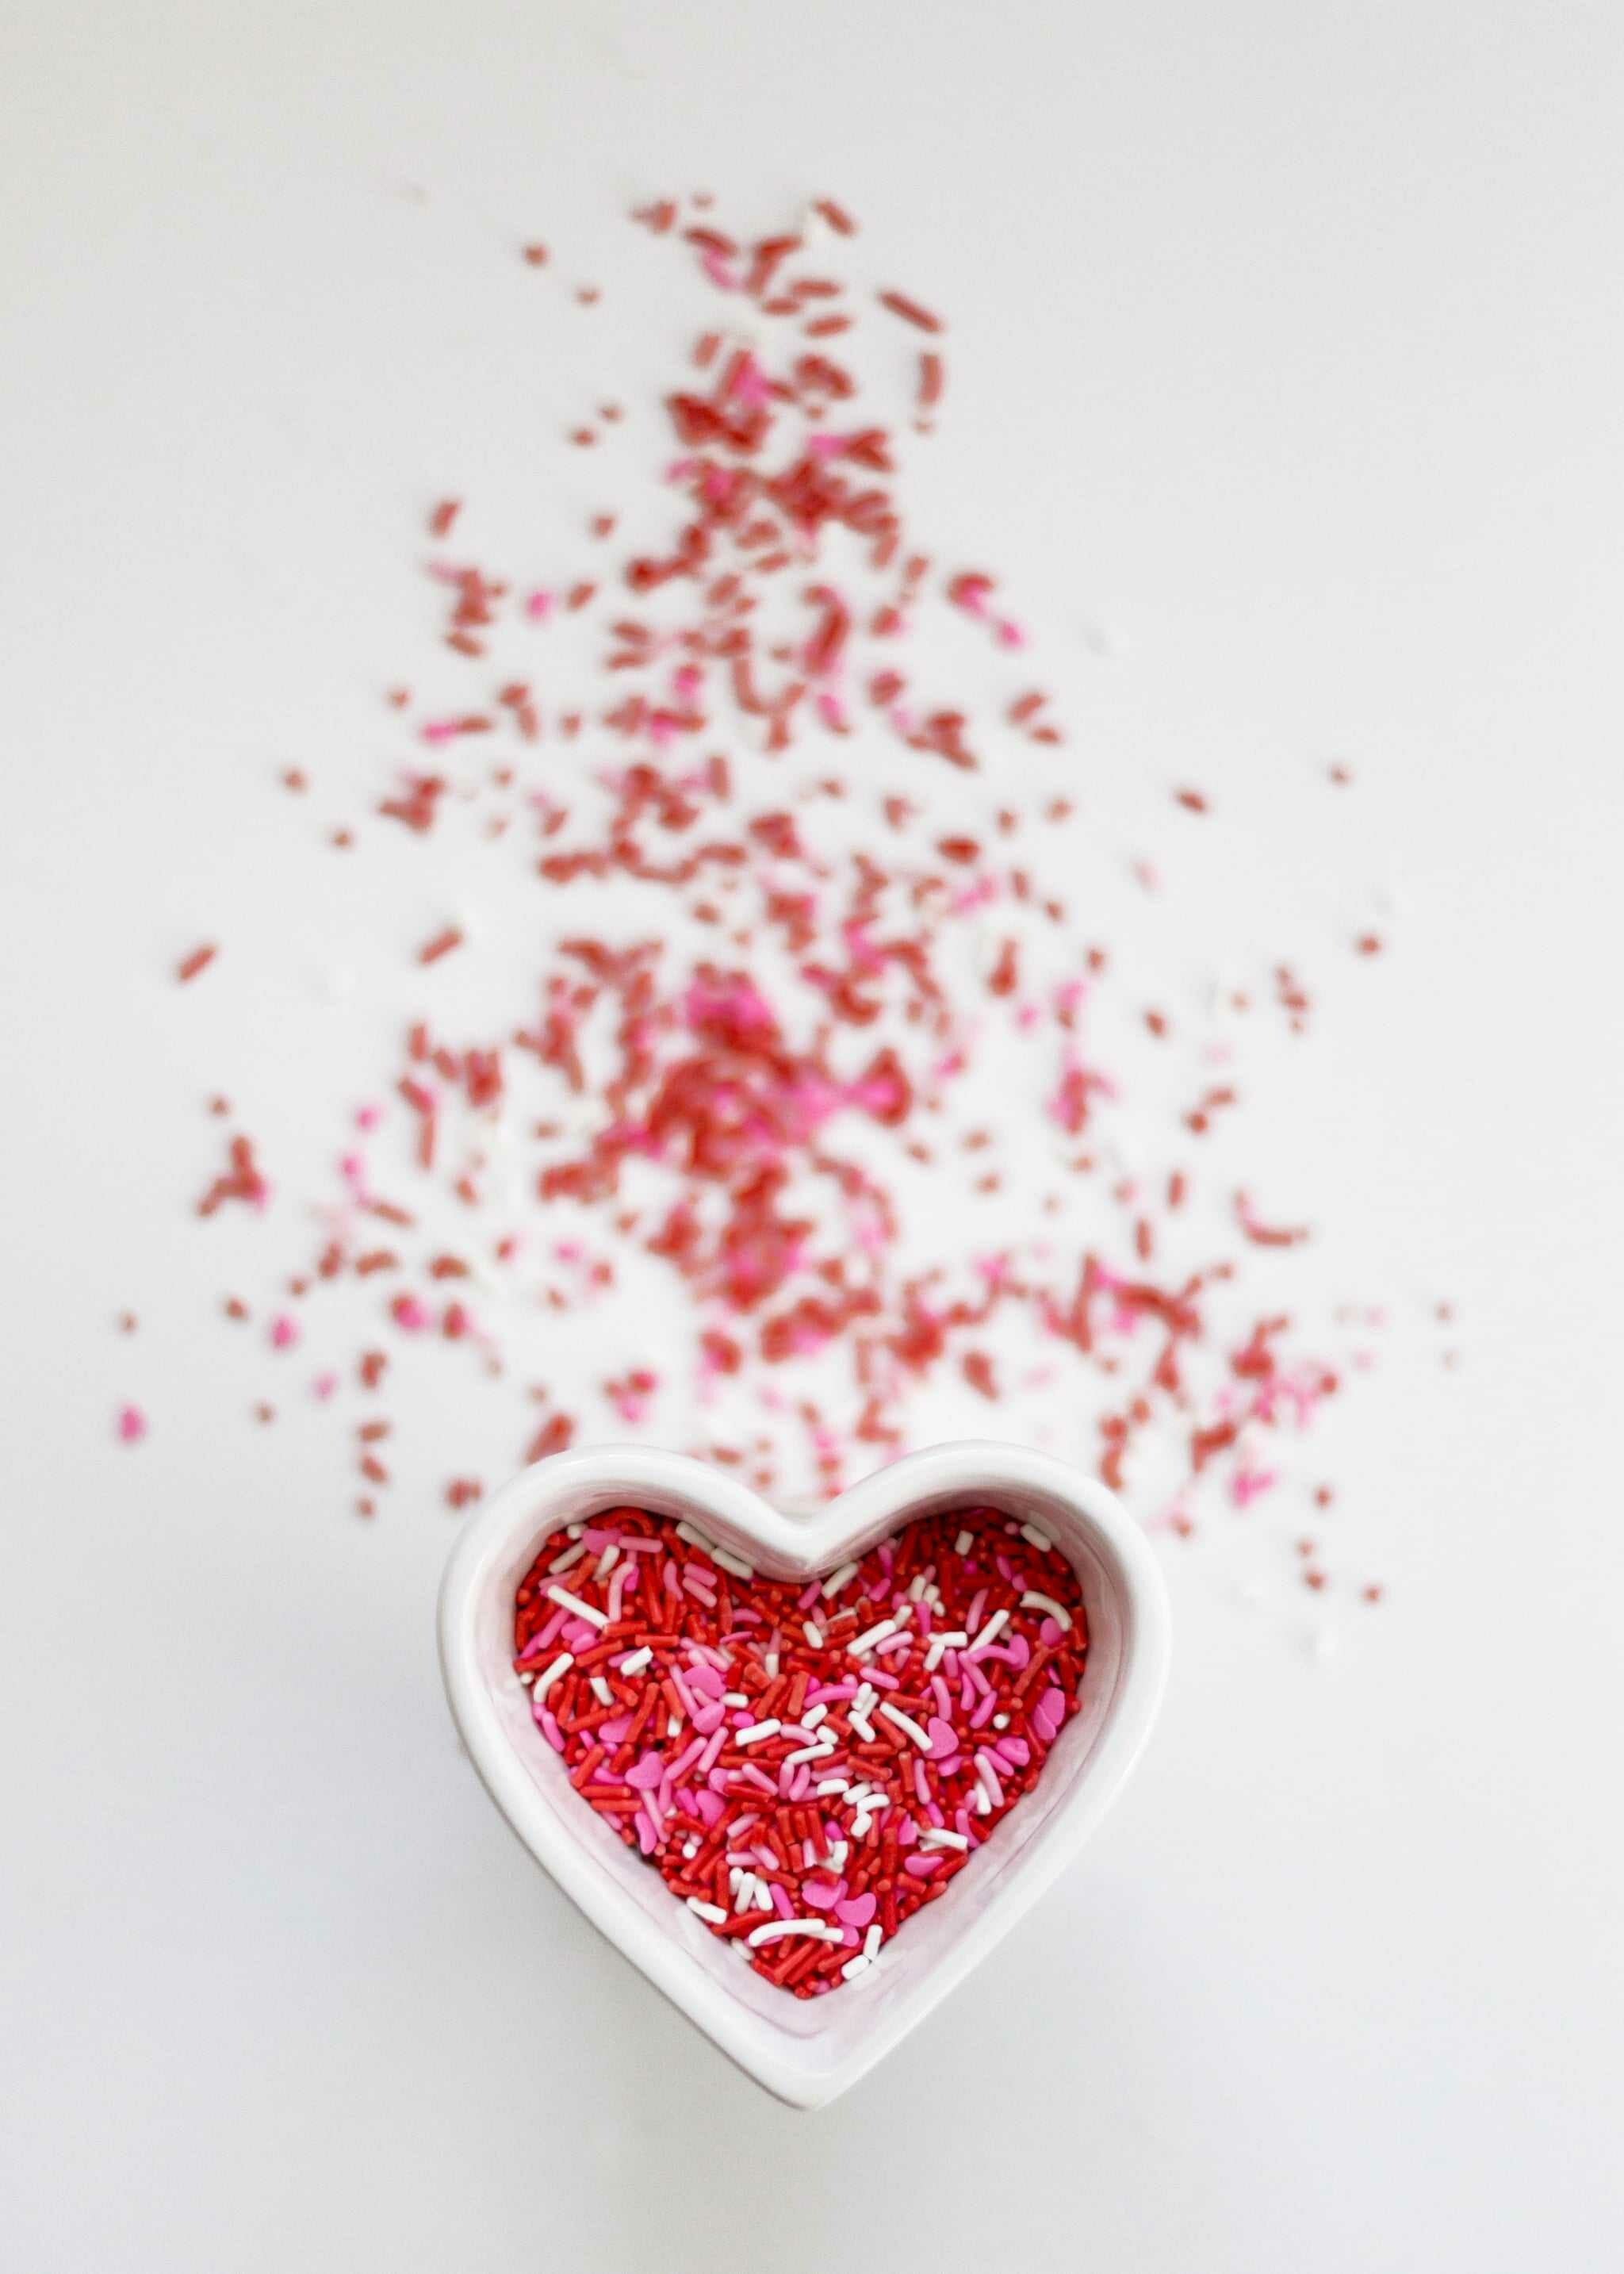 Valentine's Day: Dedicated to expressing love and affection, Sweet. 2050x2870 HD Wallpaper.